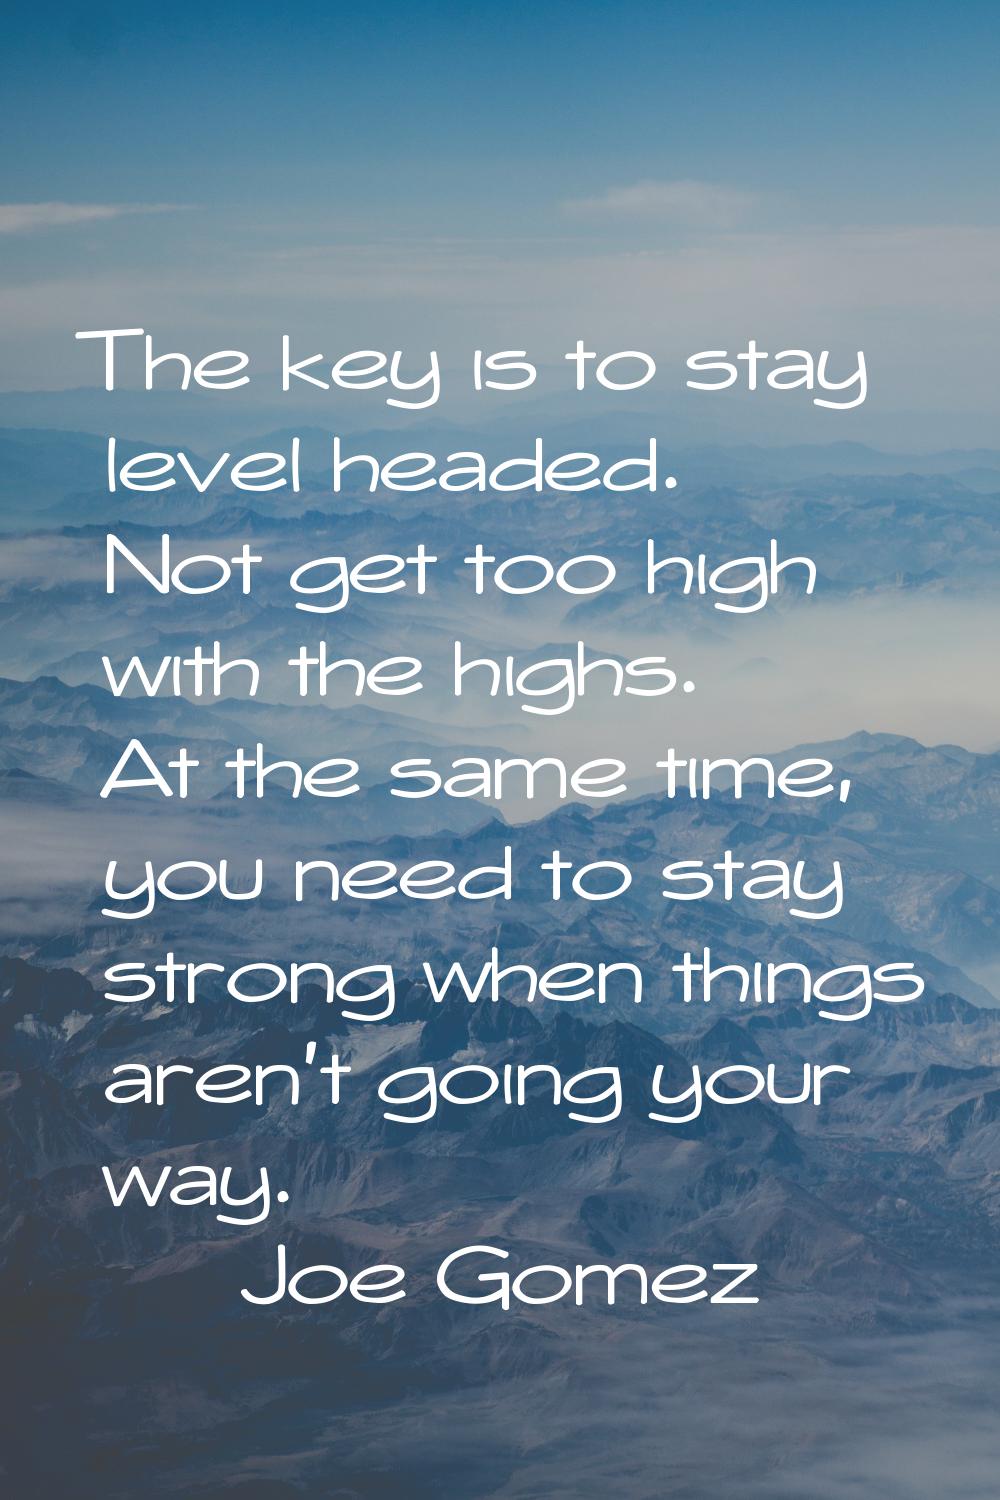 The key is to stay level headed. Not get too high with the highs. At the same time, you need to sta